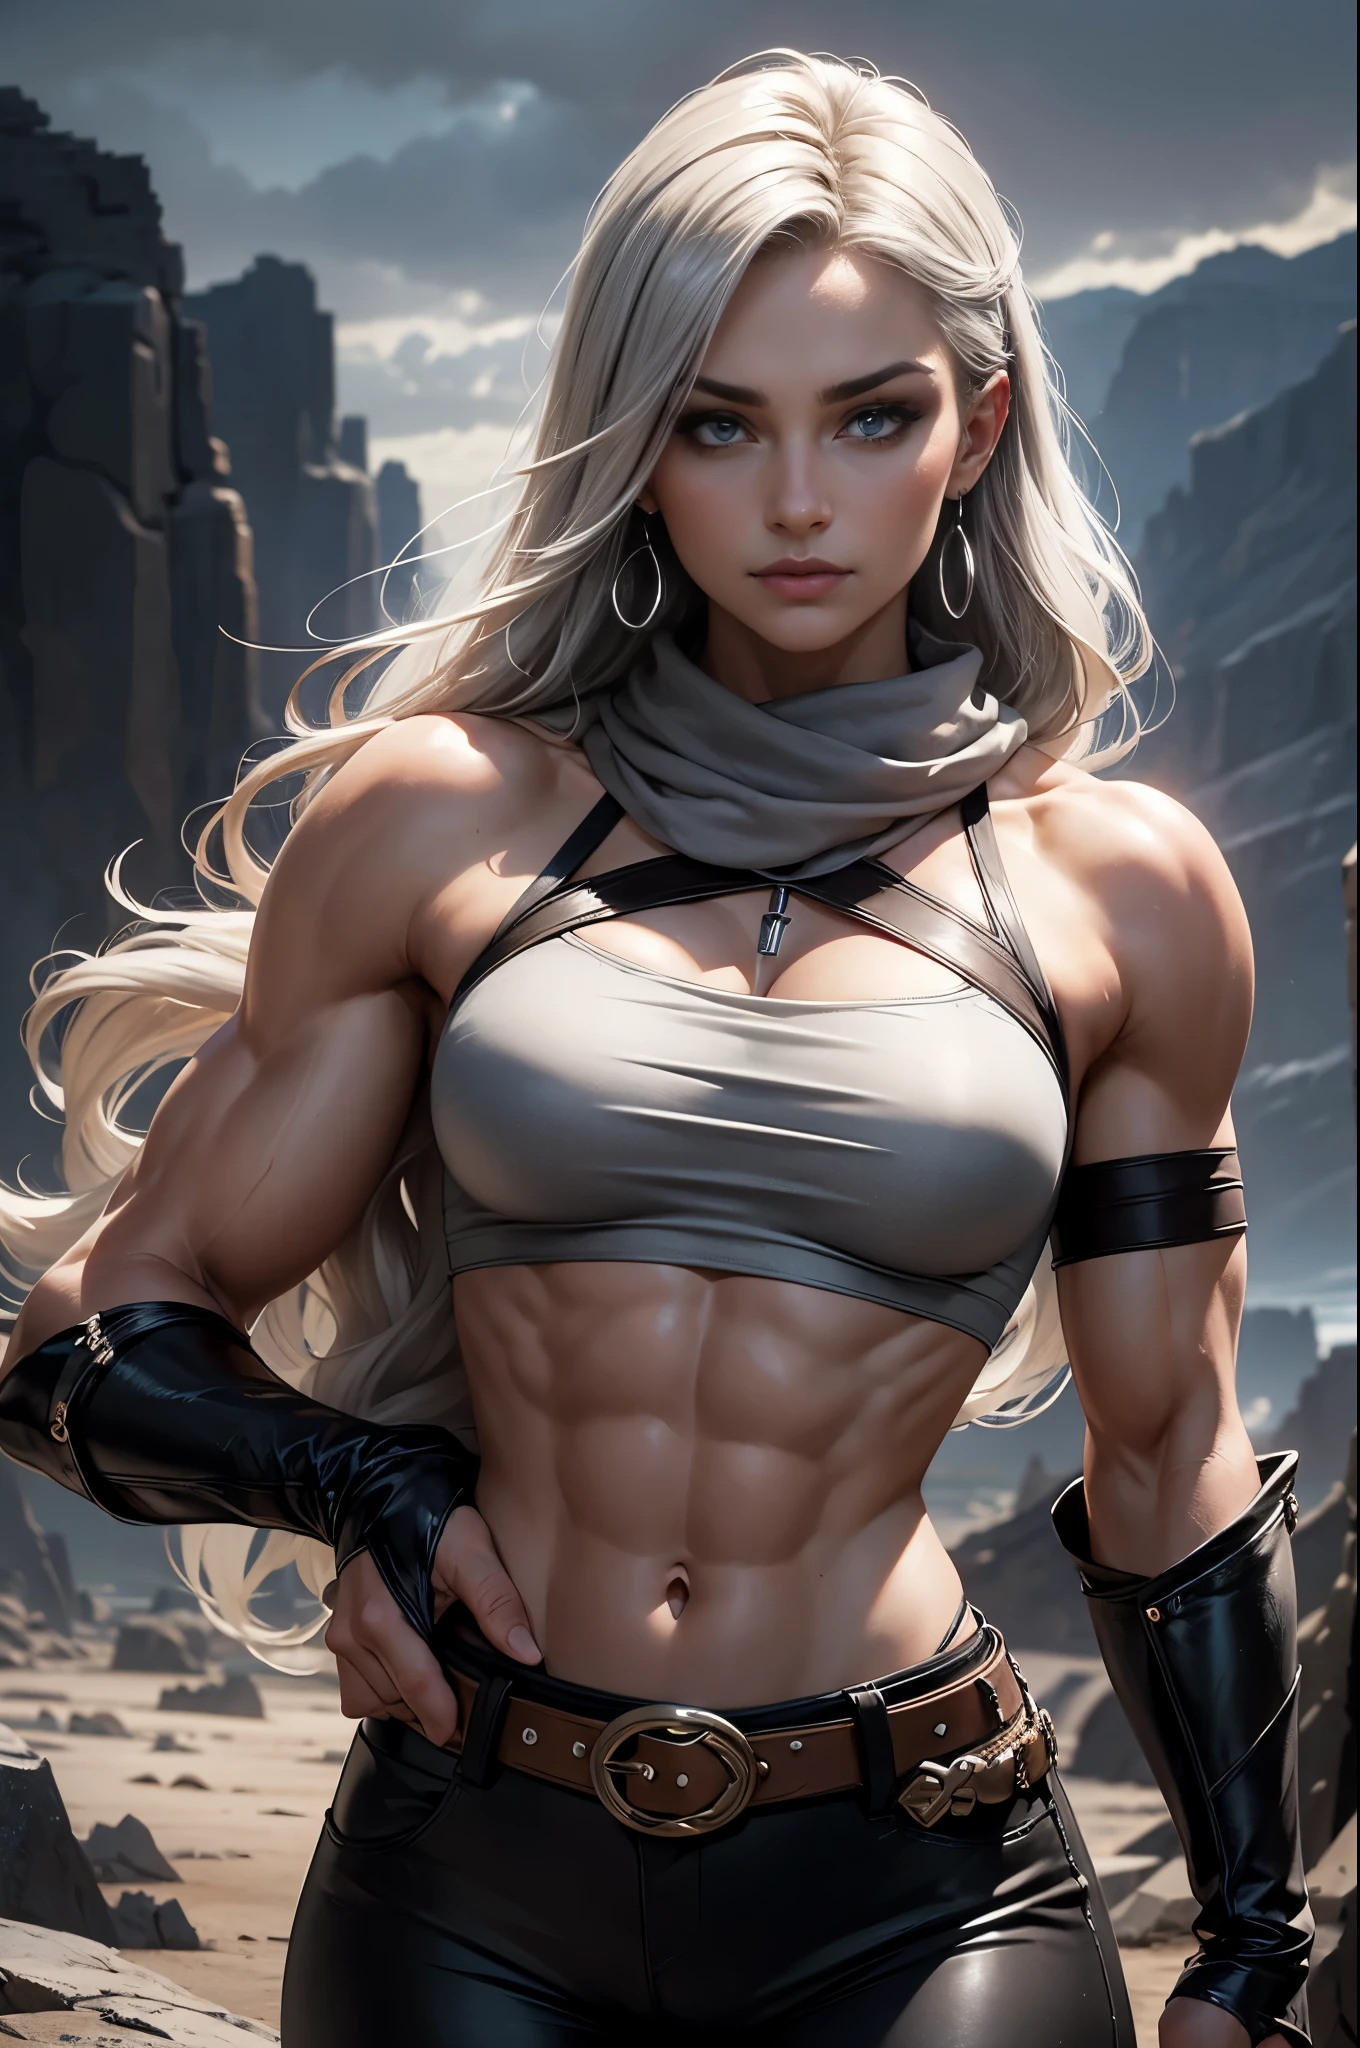 a gorgeous female warrior, mature, small smirk, smirk, muscular, silver blonde hair, long hair, wavy hair, (biceps, triceps, six pack abs), (narrow waist, wide shoulders, narrow hips), slim,  ((statuesque, towering, tall, imposing)), (defined muscles, strong muscles), off shoulder, (silver crop top, crop top, sleeves), huge breasts, earrings, jewelry, necklace, make up, long eyelashes, perfect eyes, perfect mouth, perfect face, light grey eyes, piercing gaze, gorgeous eyes, belt, crop top, (scarf), leather pants, tattoo on shoulder, perfect fingers, long fingers, no extra digits, long nails, (desolate land in the background, outdoors, at night, rocky landscape, wind,), at night, (hands on butt)